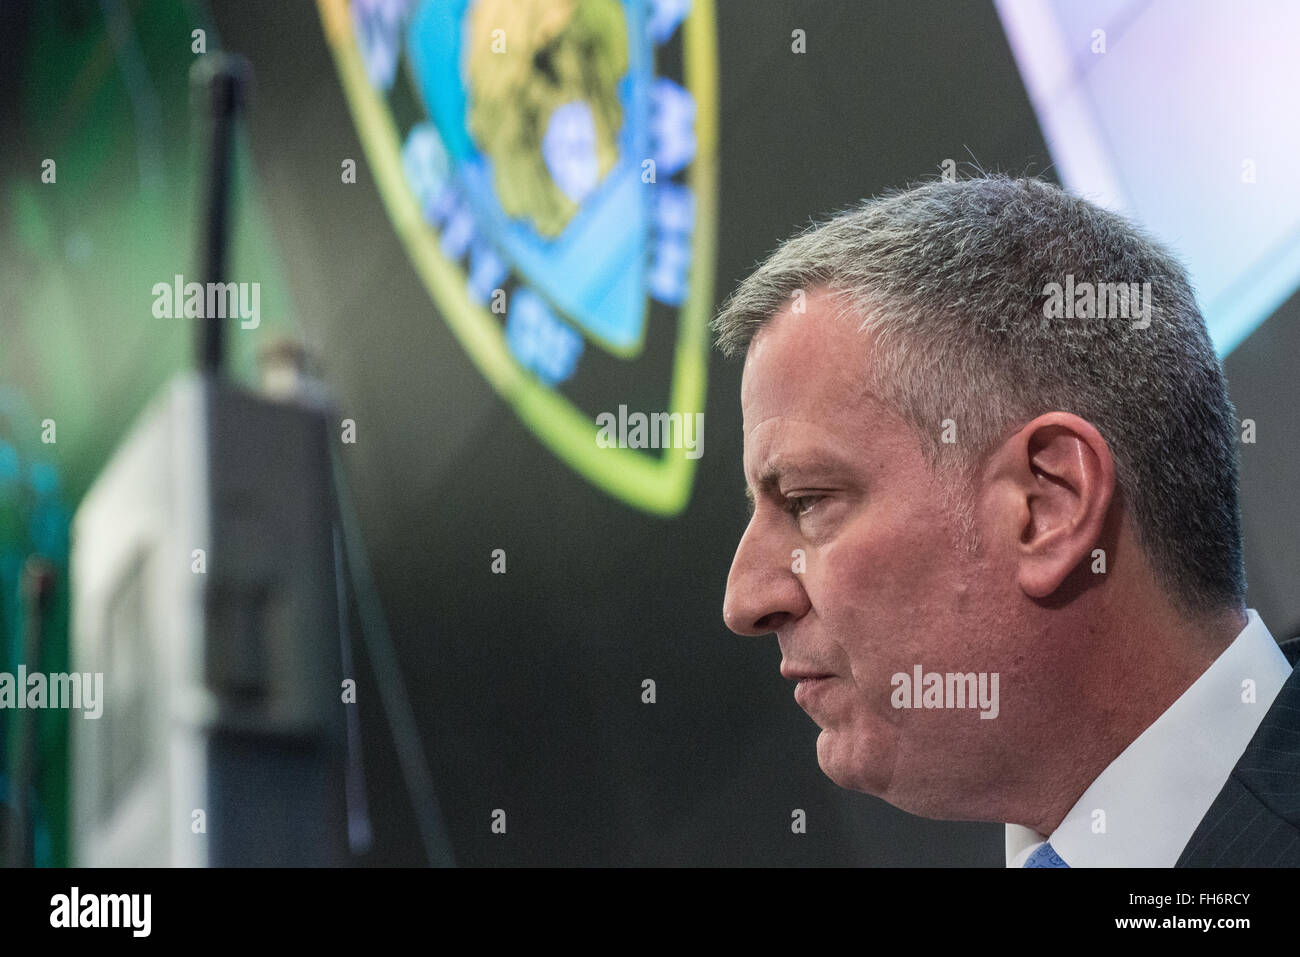 New York, United States. 23rd Feb, 2016. Mayor de Blasio looks towards a member of the press as they ask a question. NYC Mayor Bill de Blasio and Police Commissioner William Bratton held a press briefing at One Police Plaza, the headquarters of the NYPD, to announce the launch of 'CompStat 2.0,' a new system for both publicly sharing crime data and enabling much accelerated distribution of vital police information resources among officers in the field. Credit:  Albin Lohr-Jones/Pacific Press/Alamy Live News Stock Photo